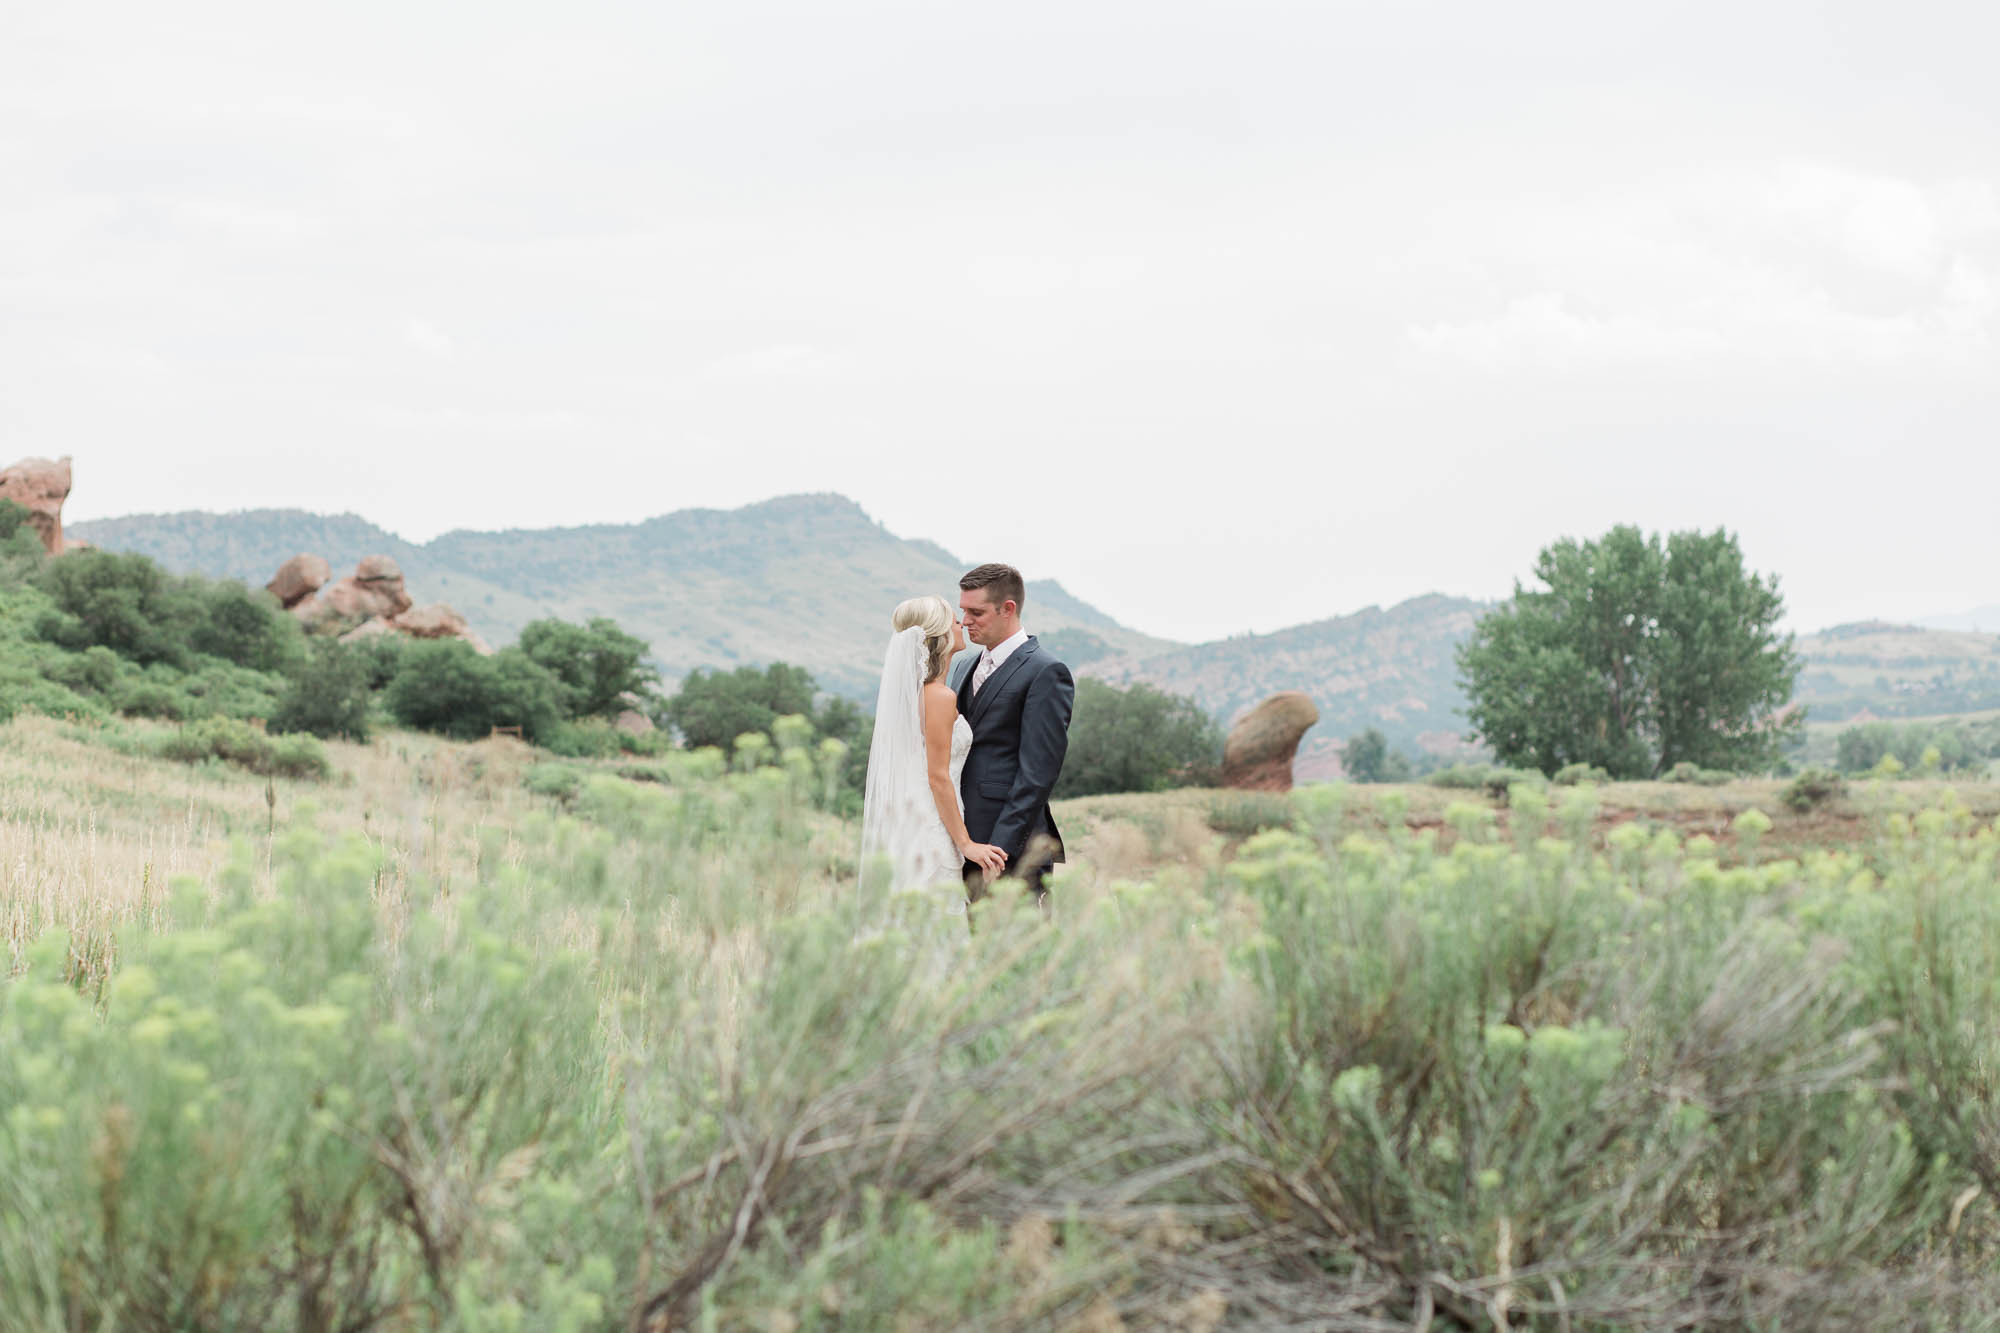 South Valley Park Bride and Groom Portrait Photography